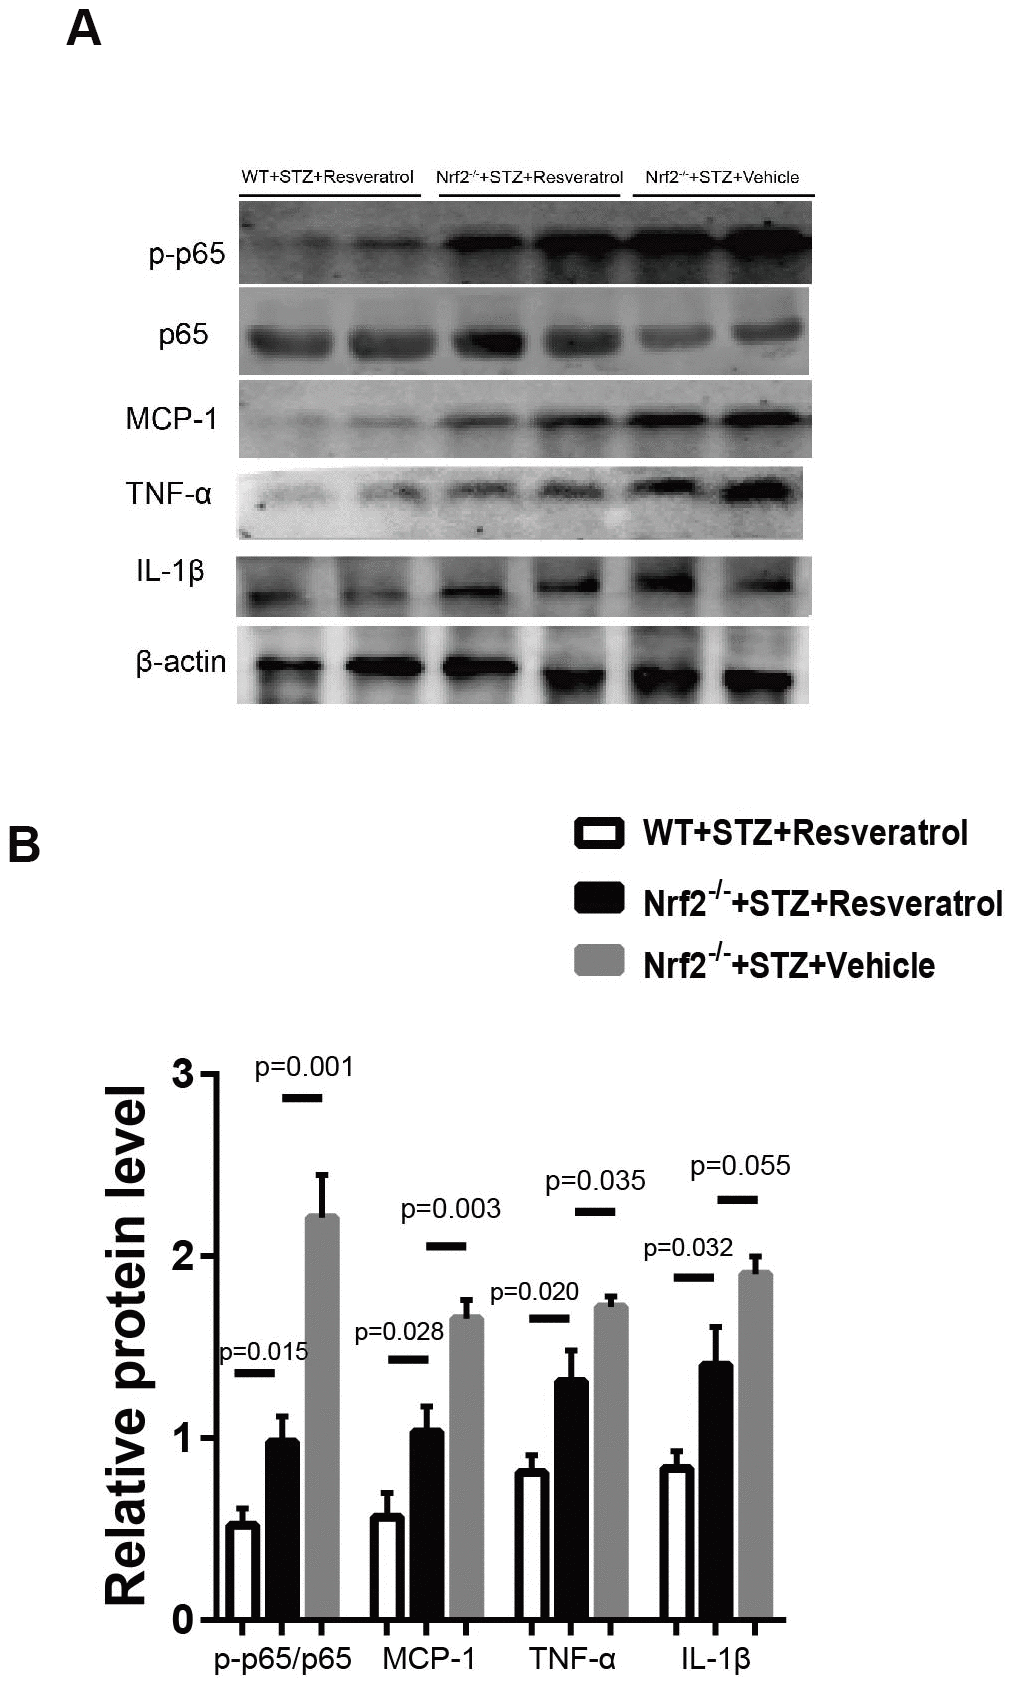 (A, B) Western blot analyses of lysates of p-p65/p65, MCP-1, TNF-a, IL-1β; from Nrf2-/-+STZ+Resveratrol, Nrf2-/-+STZ+Vehicle and WT+STZ+Resveratrol mice using the indicated antibodies at 12 weeks after STZ injection(n = 3 mice per group; data are presented as means ± SEM).